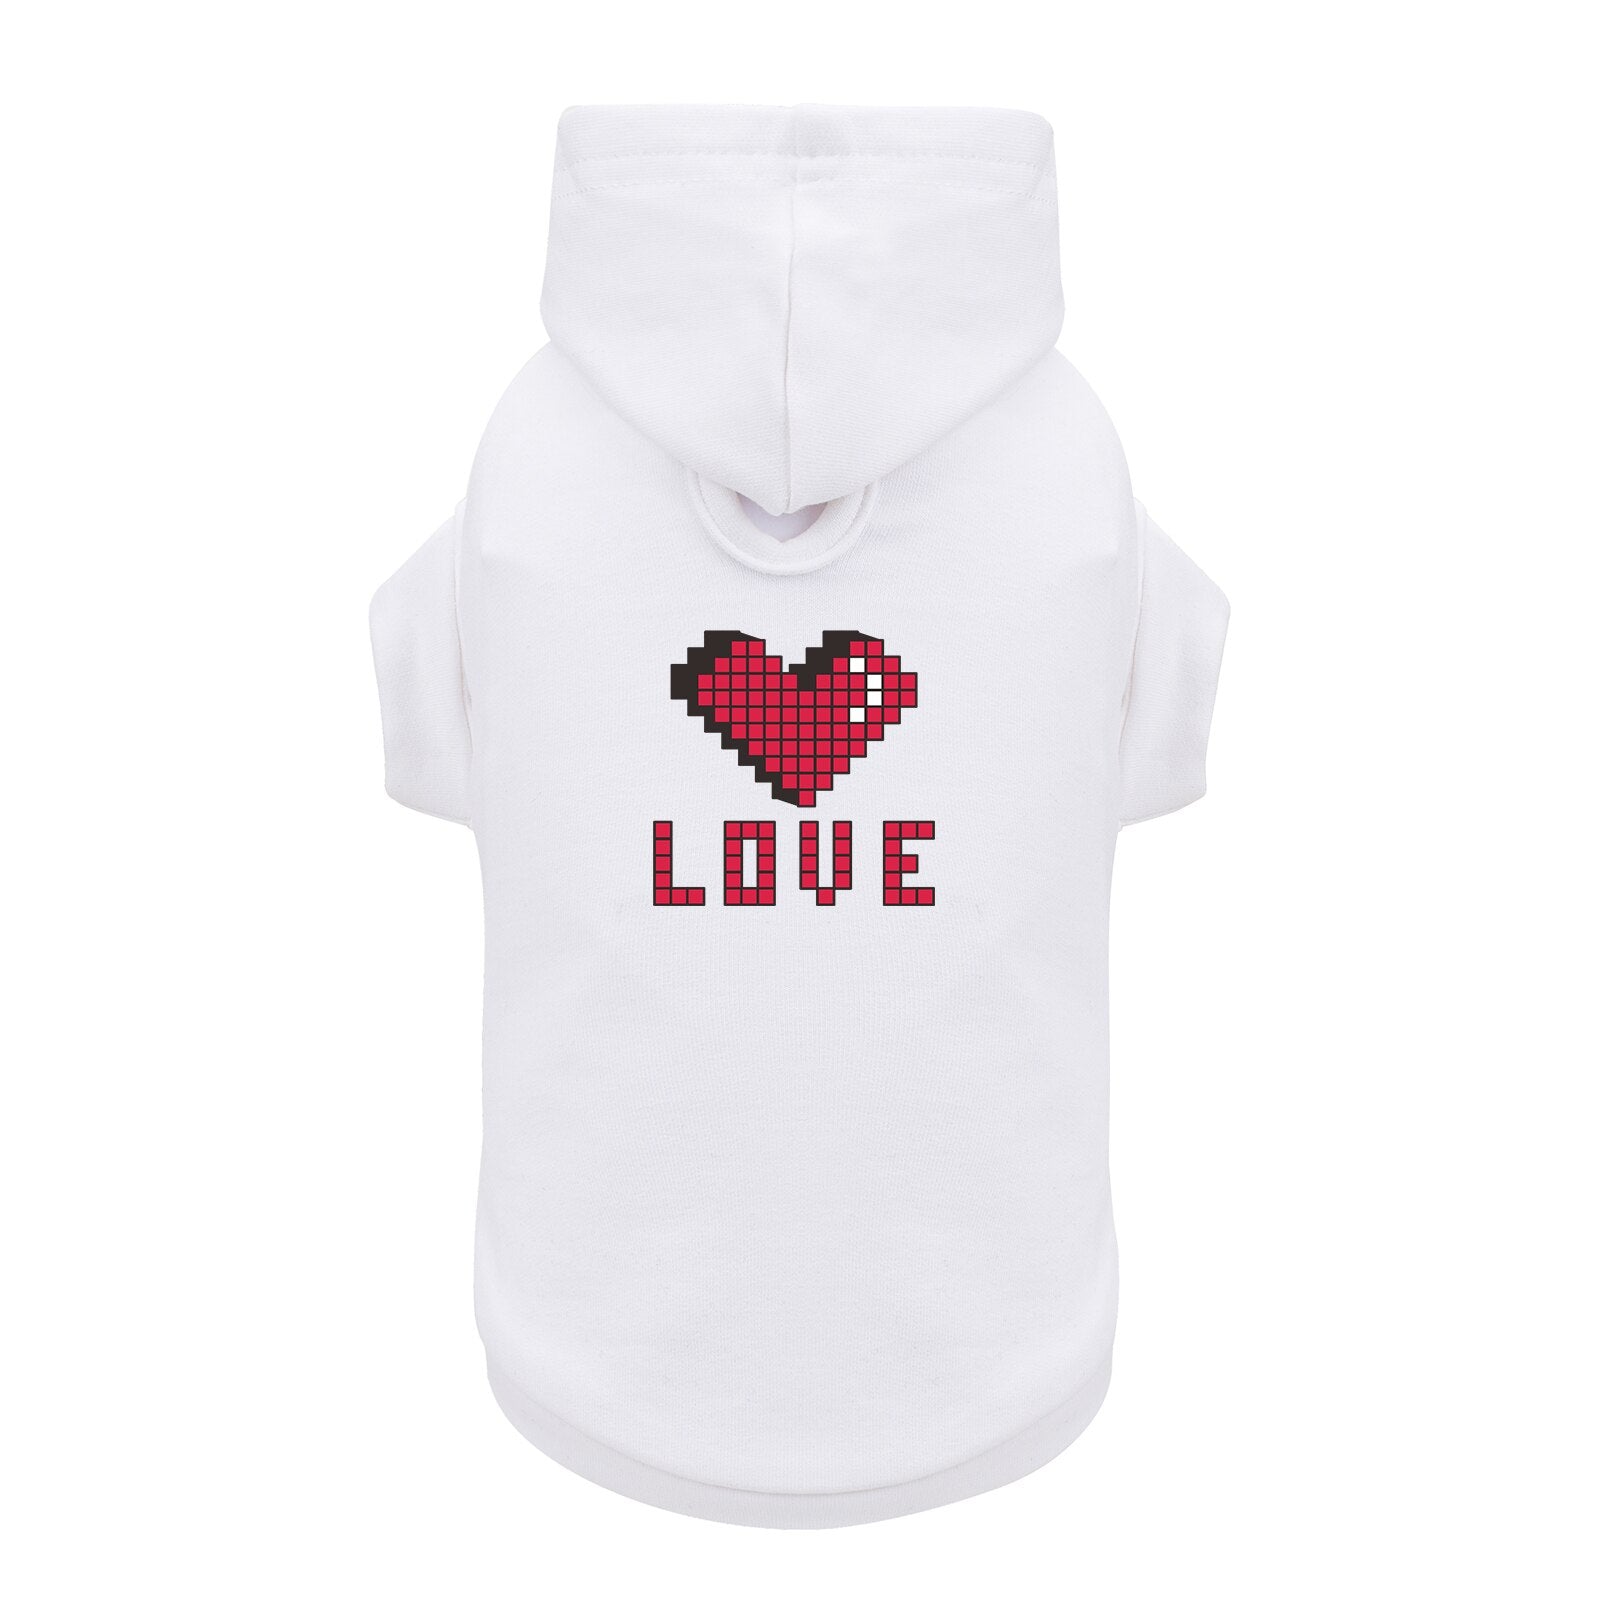 Heart Love Pattern Printed Pet Clothes for Small Medium Large Big Dogs Cats, Stripe Red White Apparel